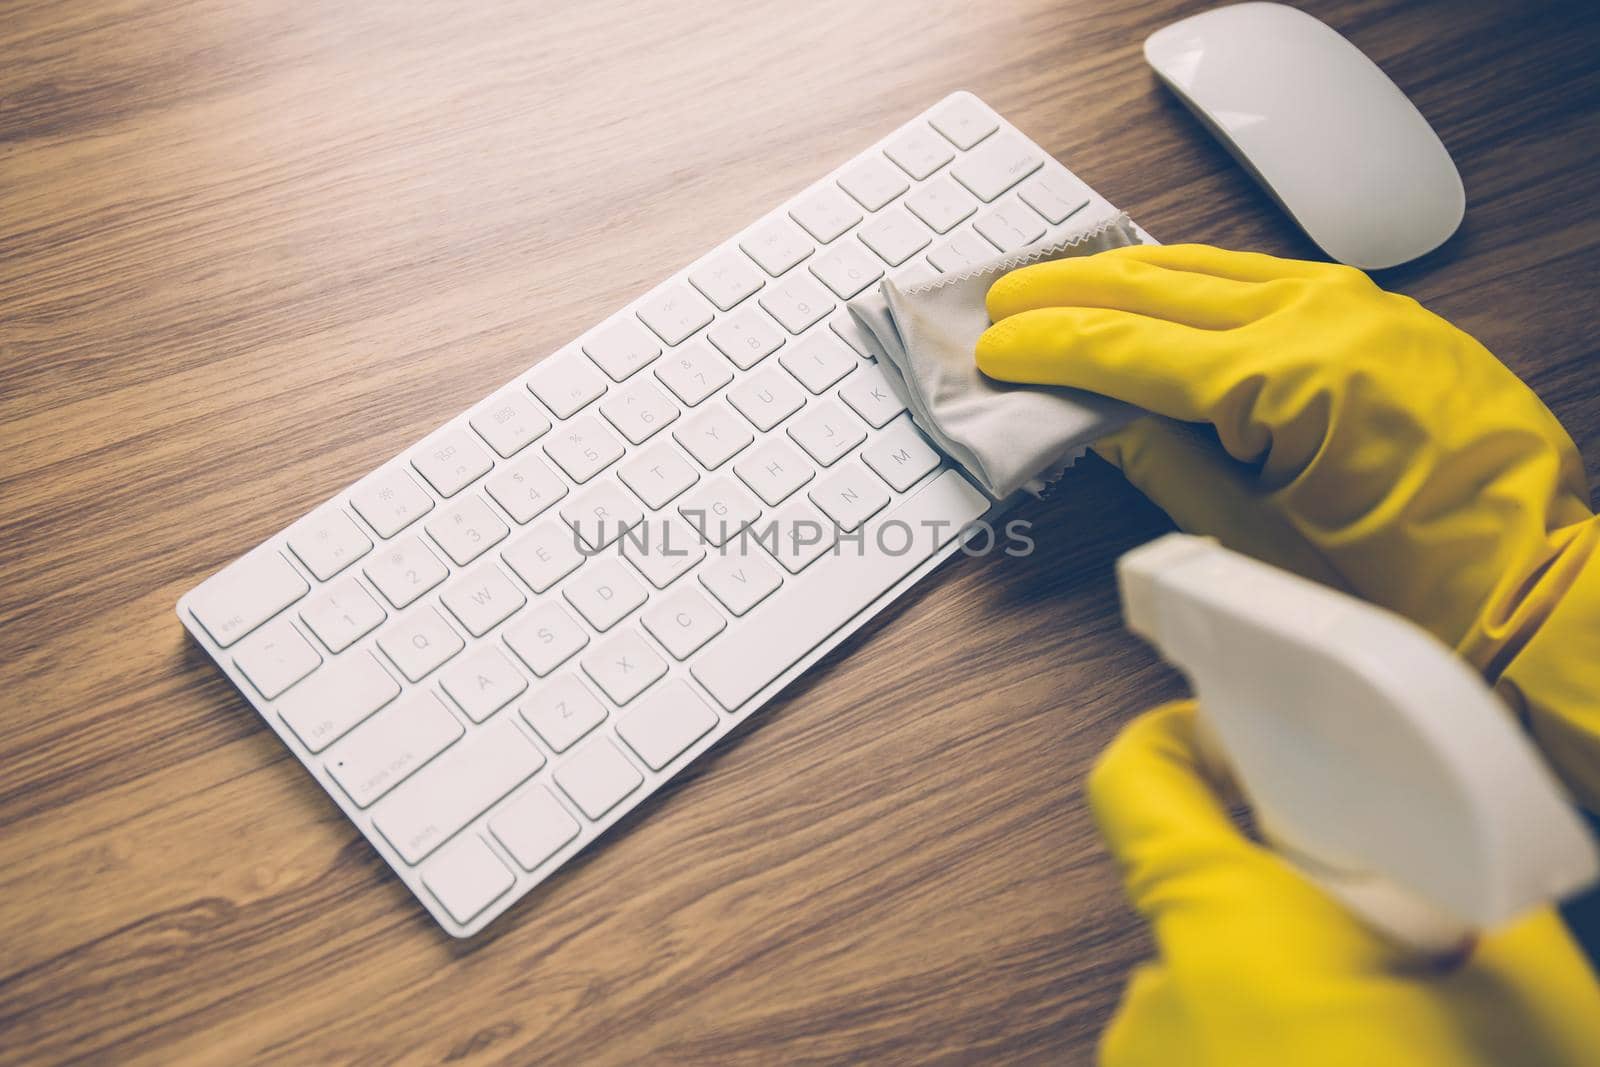 Hand of man cleaning keyboard computer with antibacterial for protect epidemic disease covid-19, fabric having antiseptic alcohol clean and wash laptop for on desk, business and health concept. by nnudoo